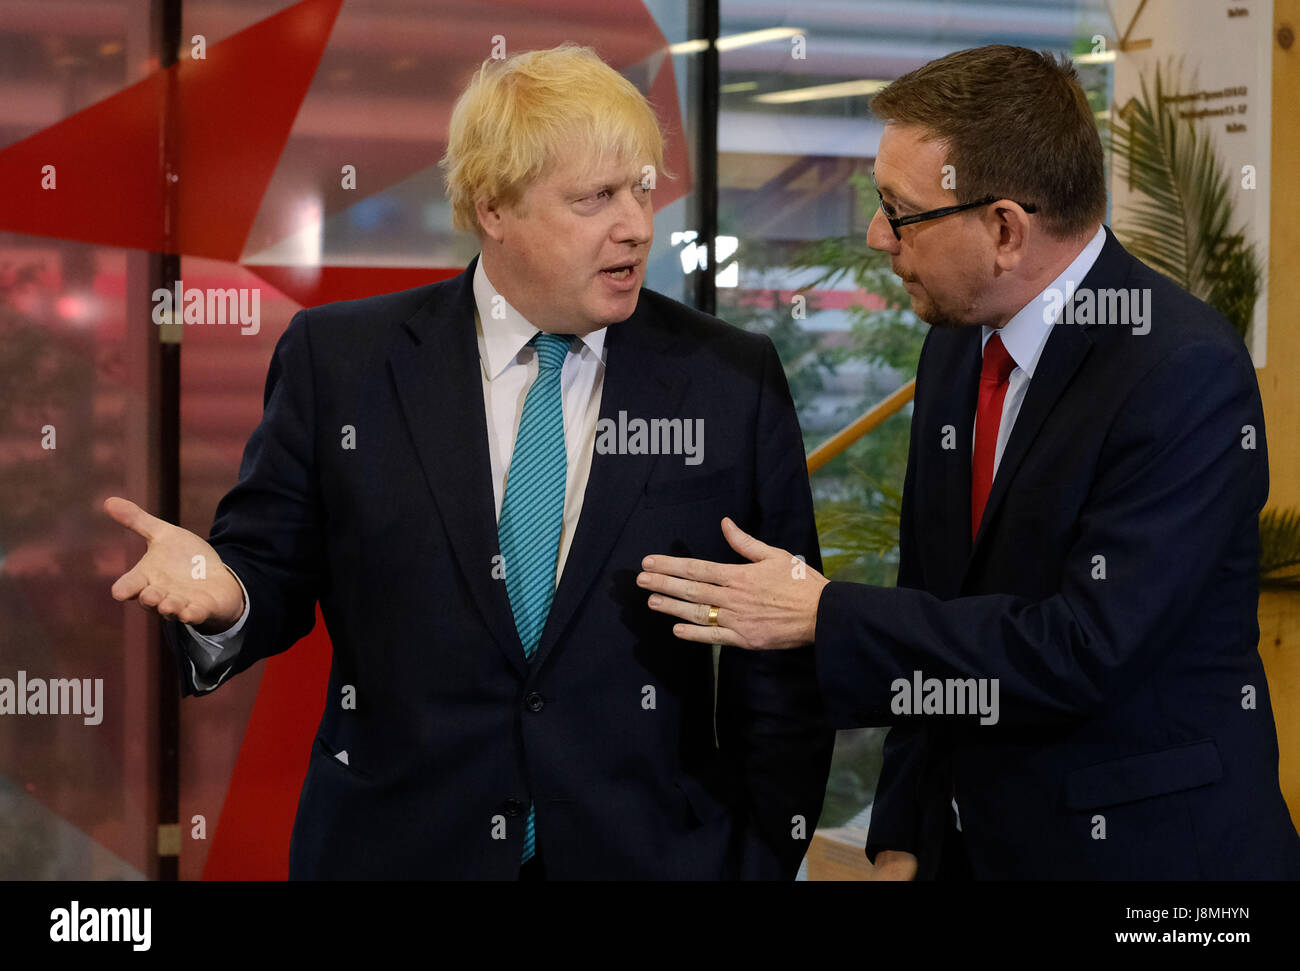 Foreign Secretary Boris Johnson (left) and Labour MP Andrew Gwynne take part in a Sky News programme at Sky studios in Osterley, west London, ahead of a joint Channel 4 and Sky News general election show. Stock Photo